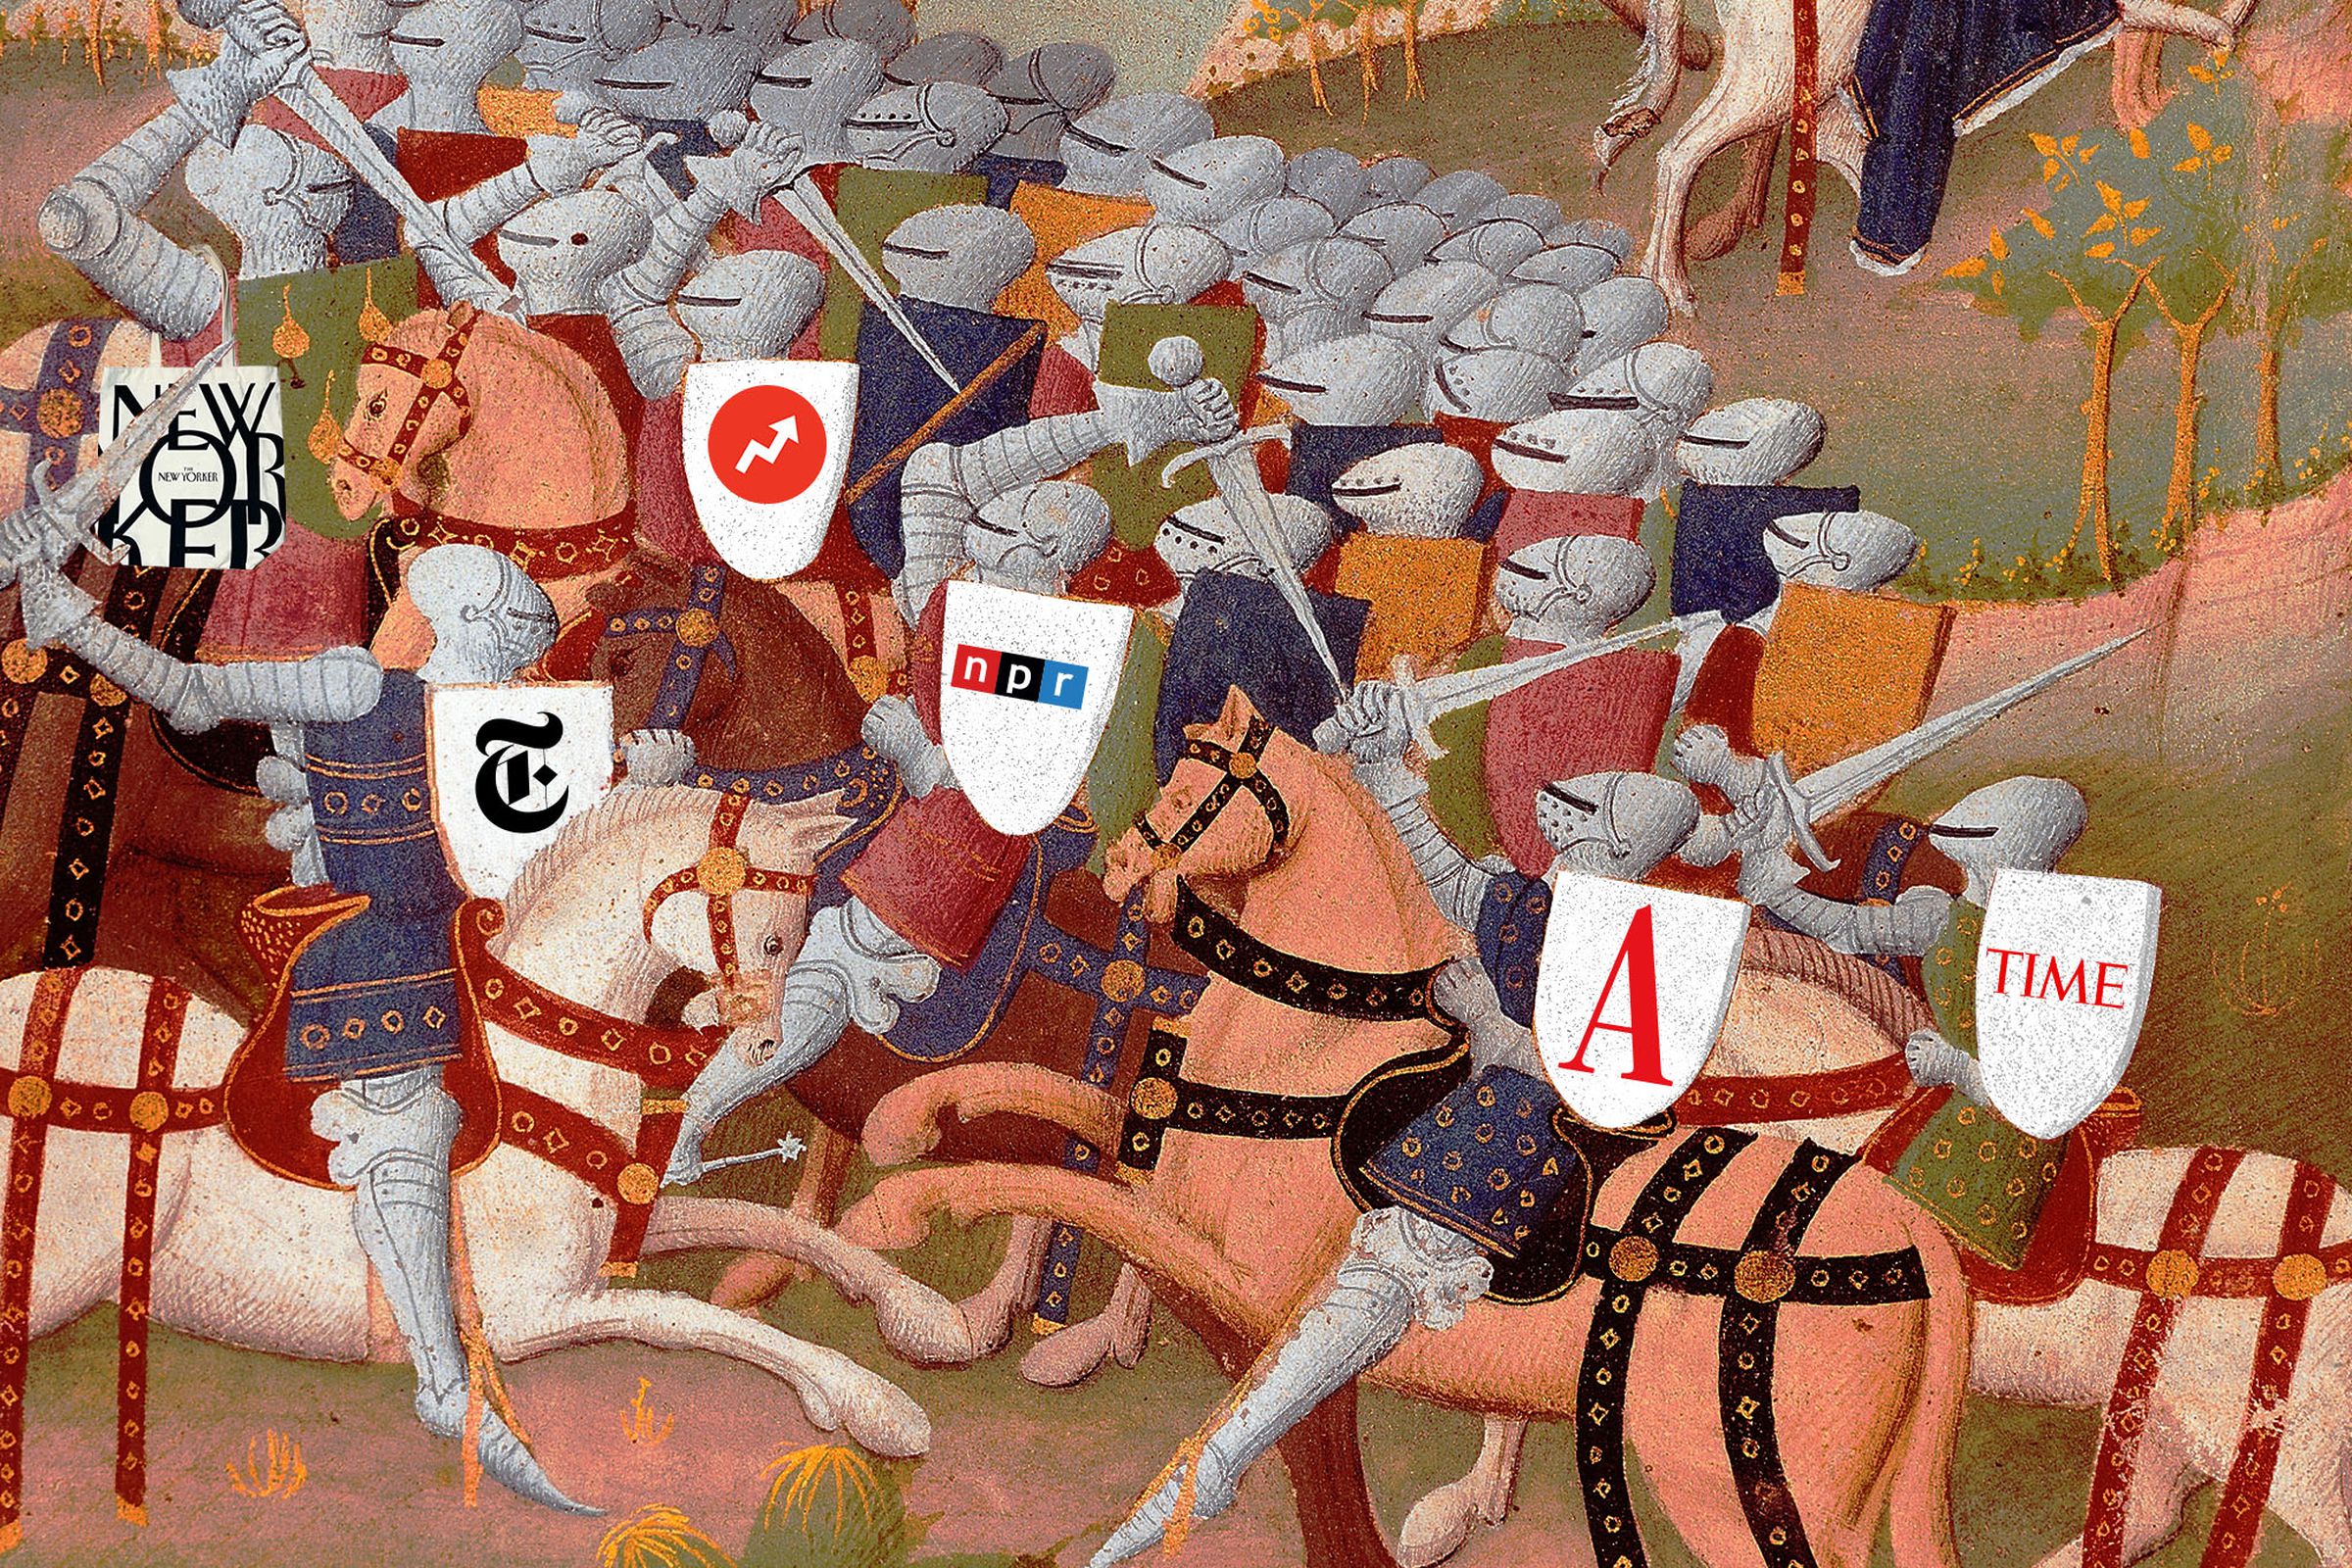 Collage of a piece of medieval art of knights battling but their shields are different news media company logos.